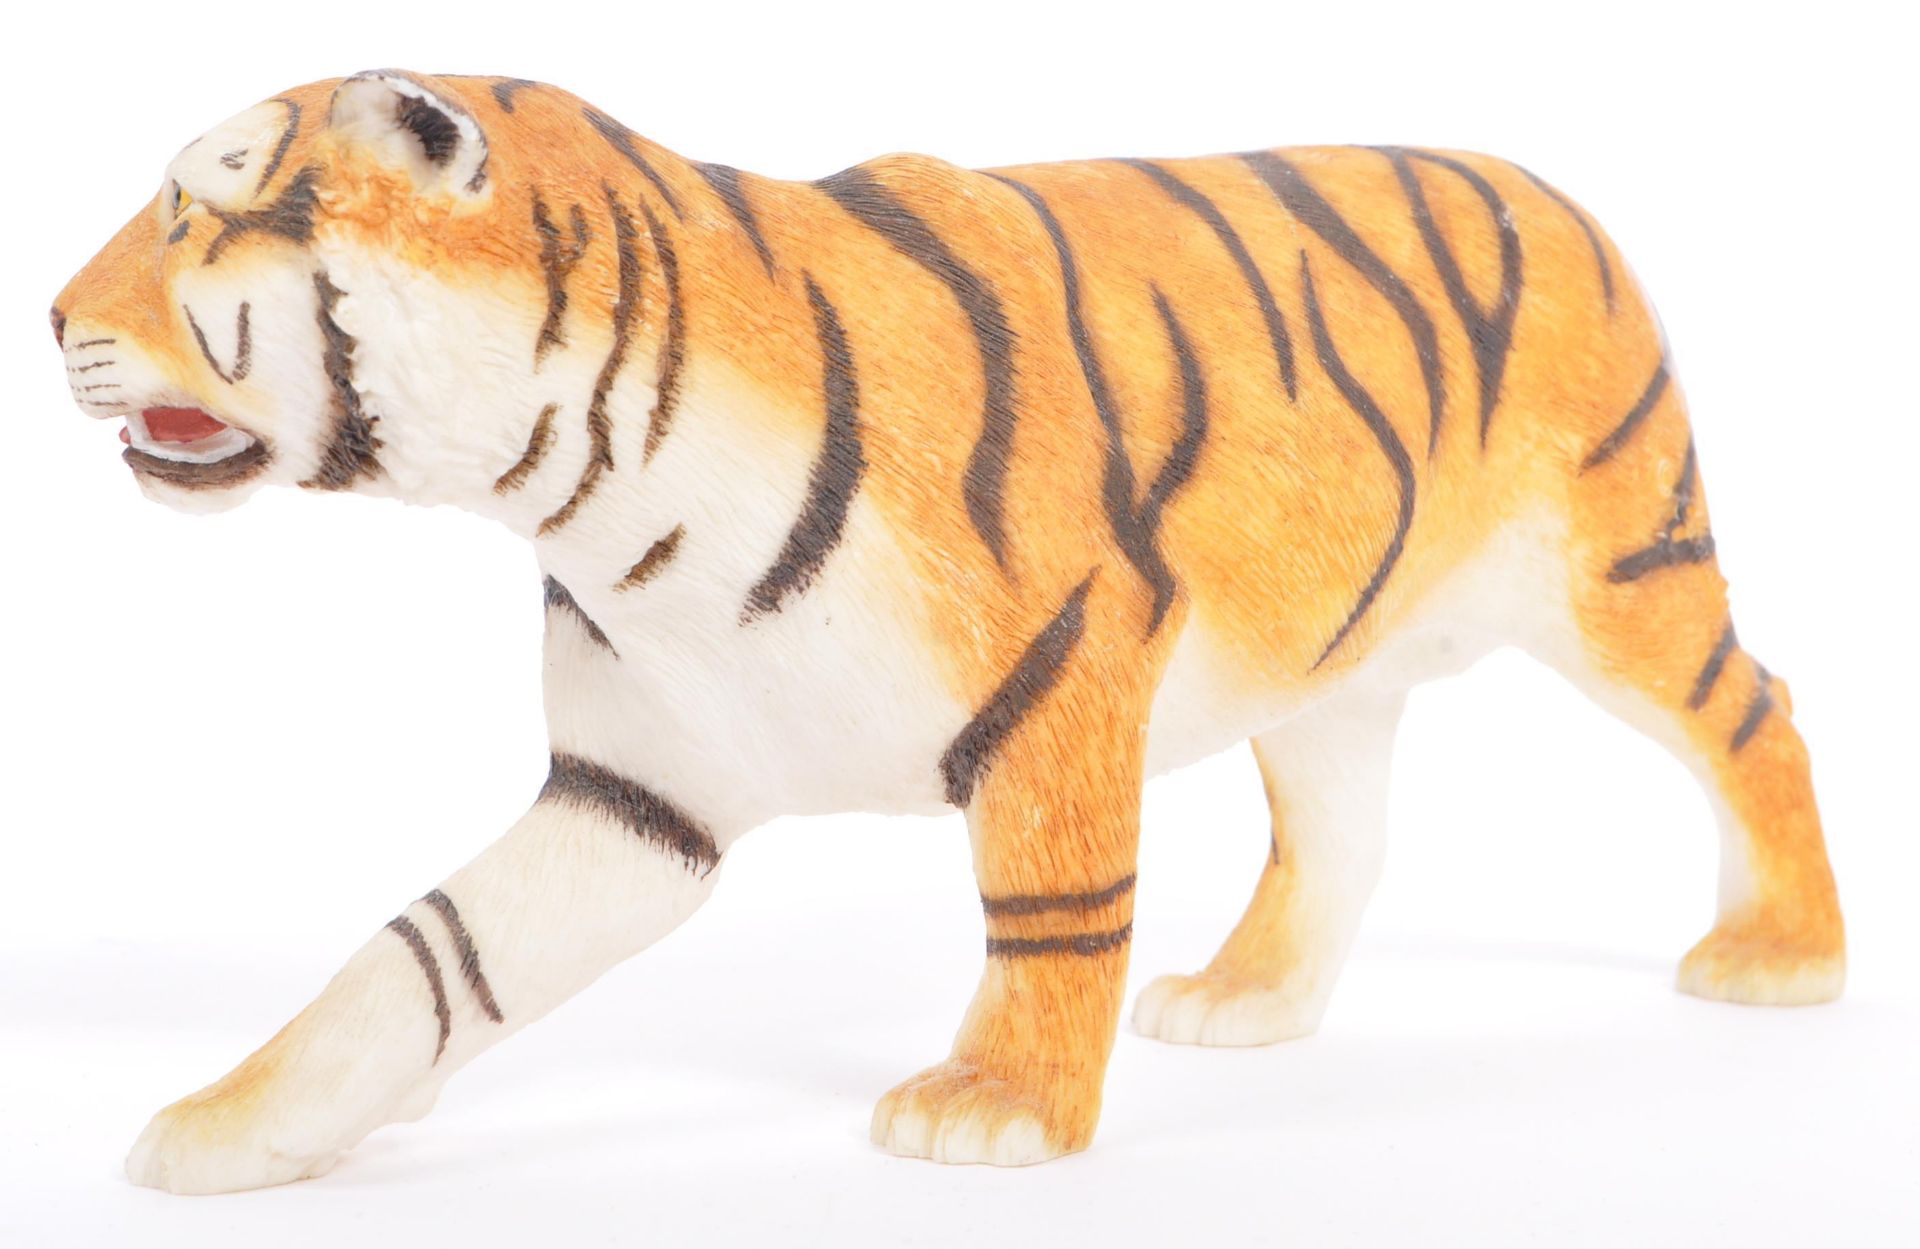 COLLECTION OF OF RESIN TIGER FIGURINES BY THE JULIANA COLLECTION - Image 13 of 13